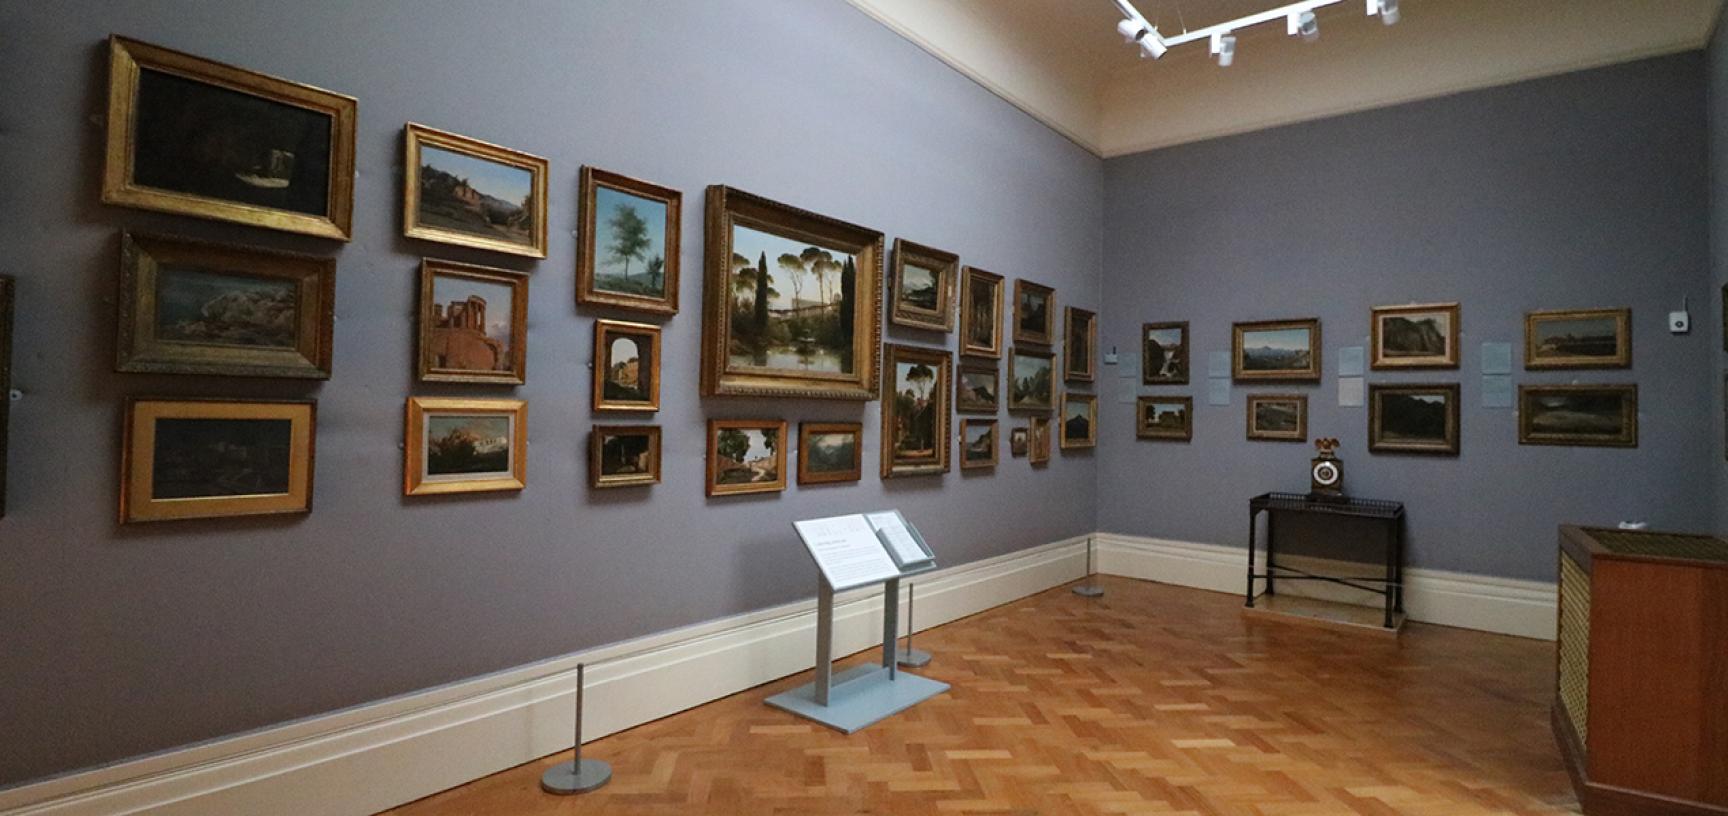  LANDSCAPE OIL SKETCHES Gallery at the Ashmolean Museum